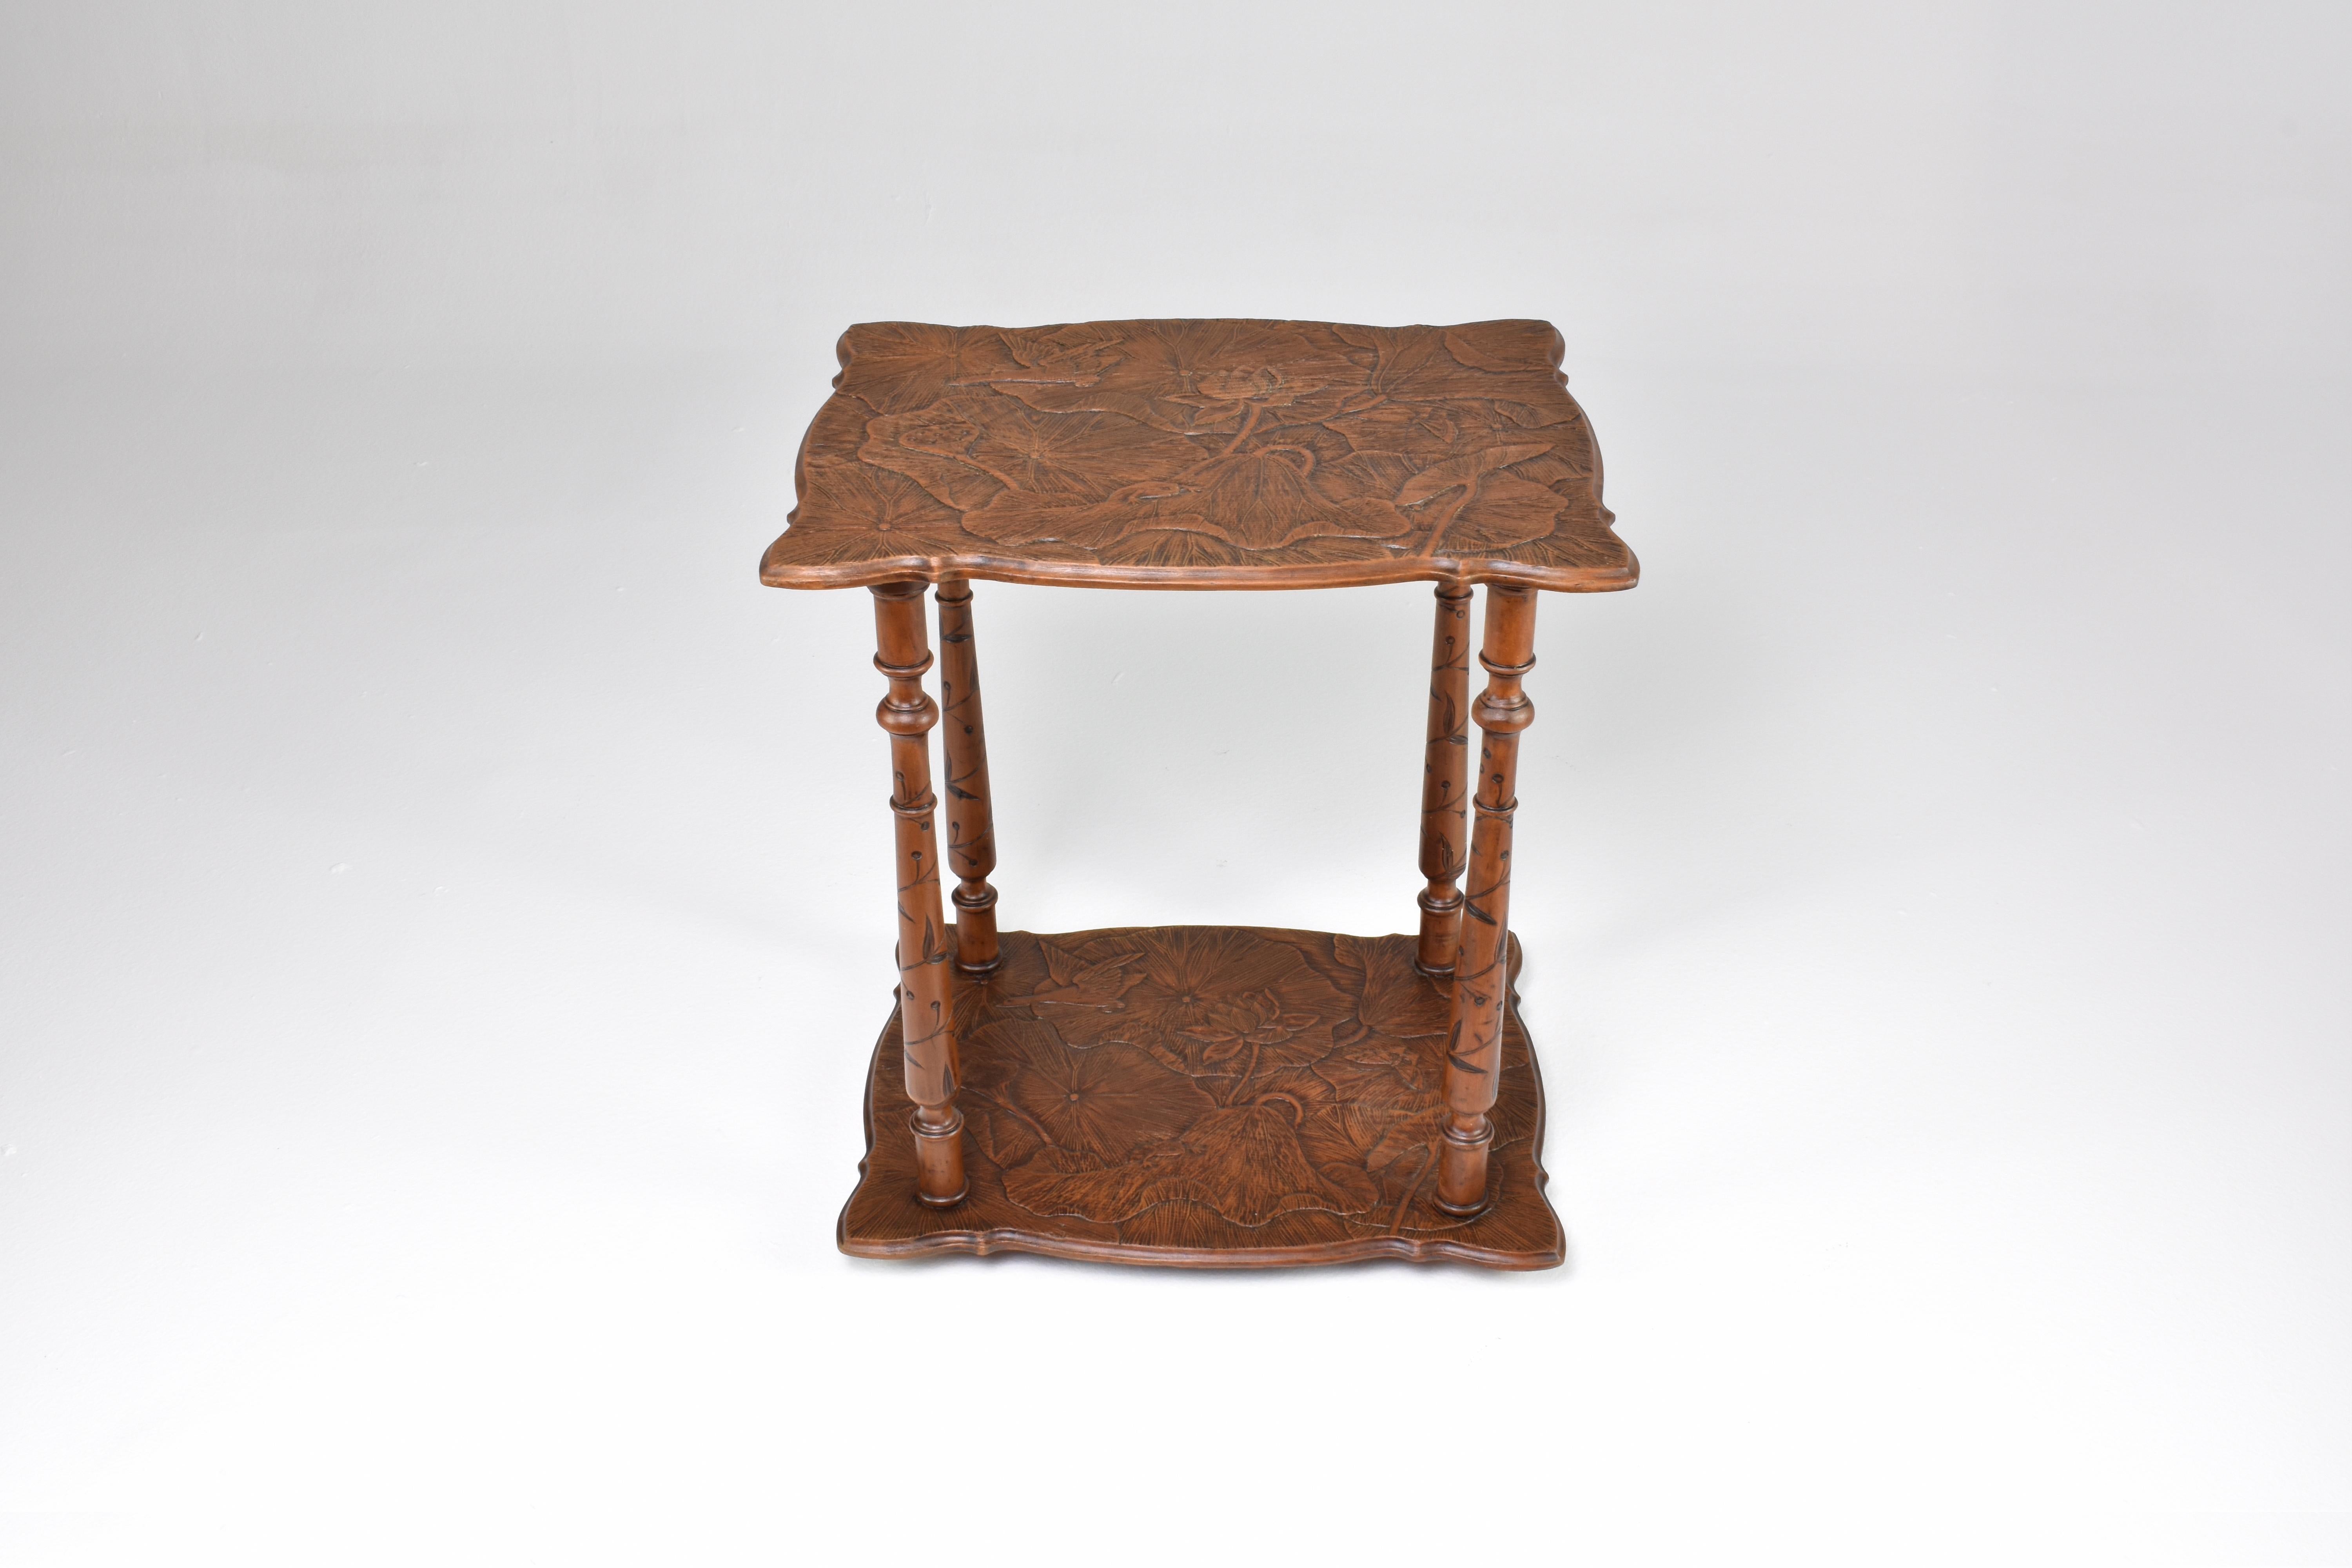 Experience the elegance of this tea table, reminiscent of the distinguished designs imported by the English firm, Liberty and Co., around 1900 from Art Nouveau Japan. Boasting intricately carved floral elements on both tabletops, the frame is